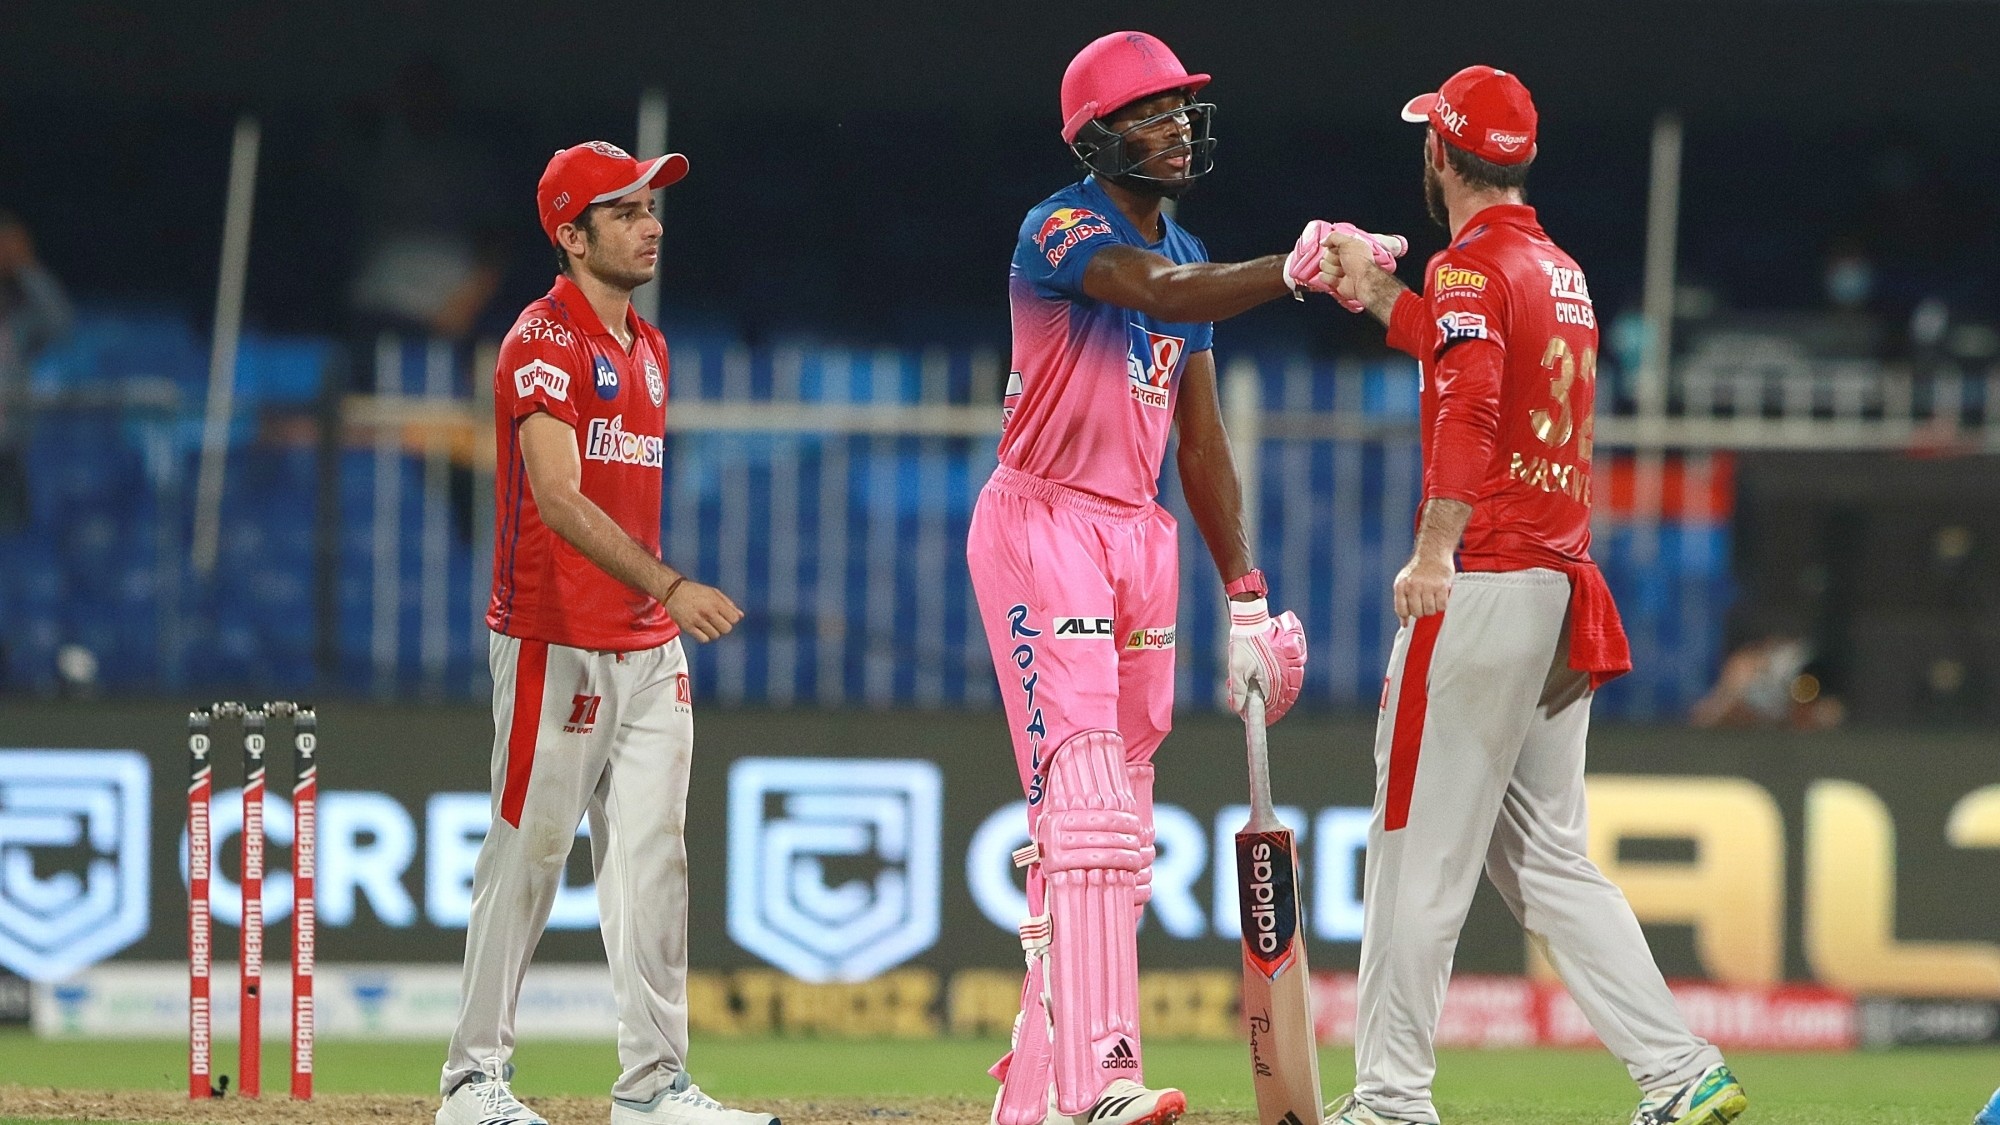 IPL 2020: RR's Jofra Archer roasts Kings XI Punjab on Twitter after an IPL record chase victory